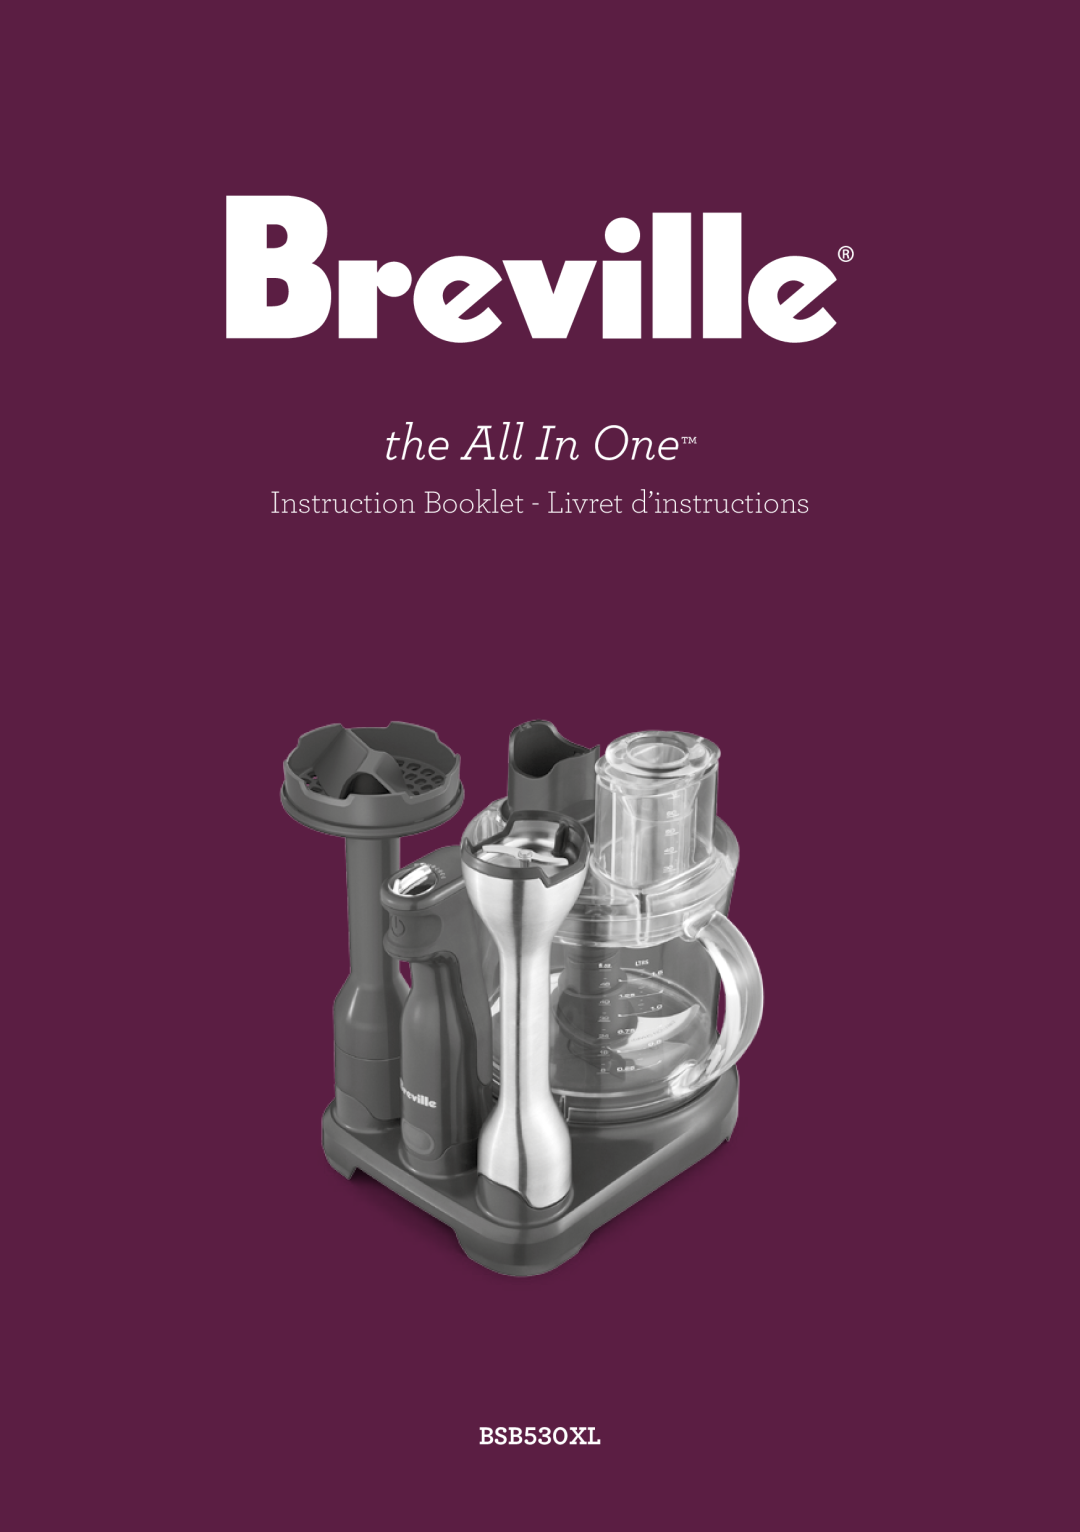 Breville BSB530XL manual the All In One, Instruction Booklet - Livret d’instructions, Typeset 